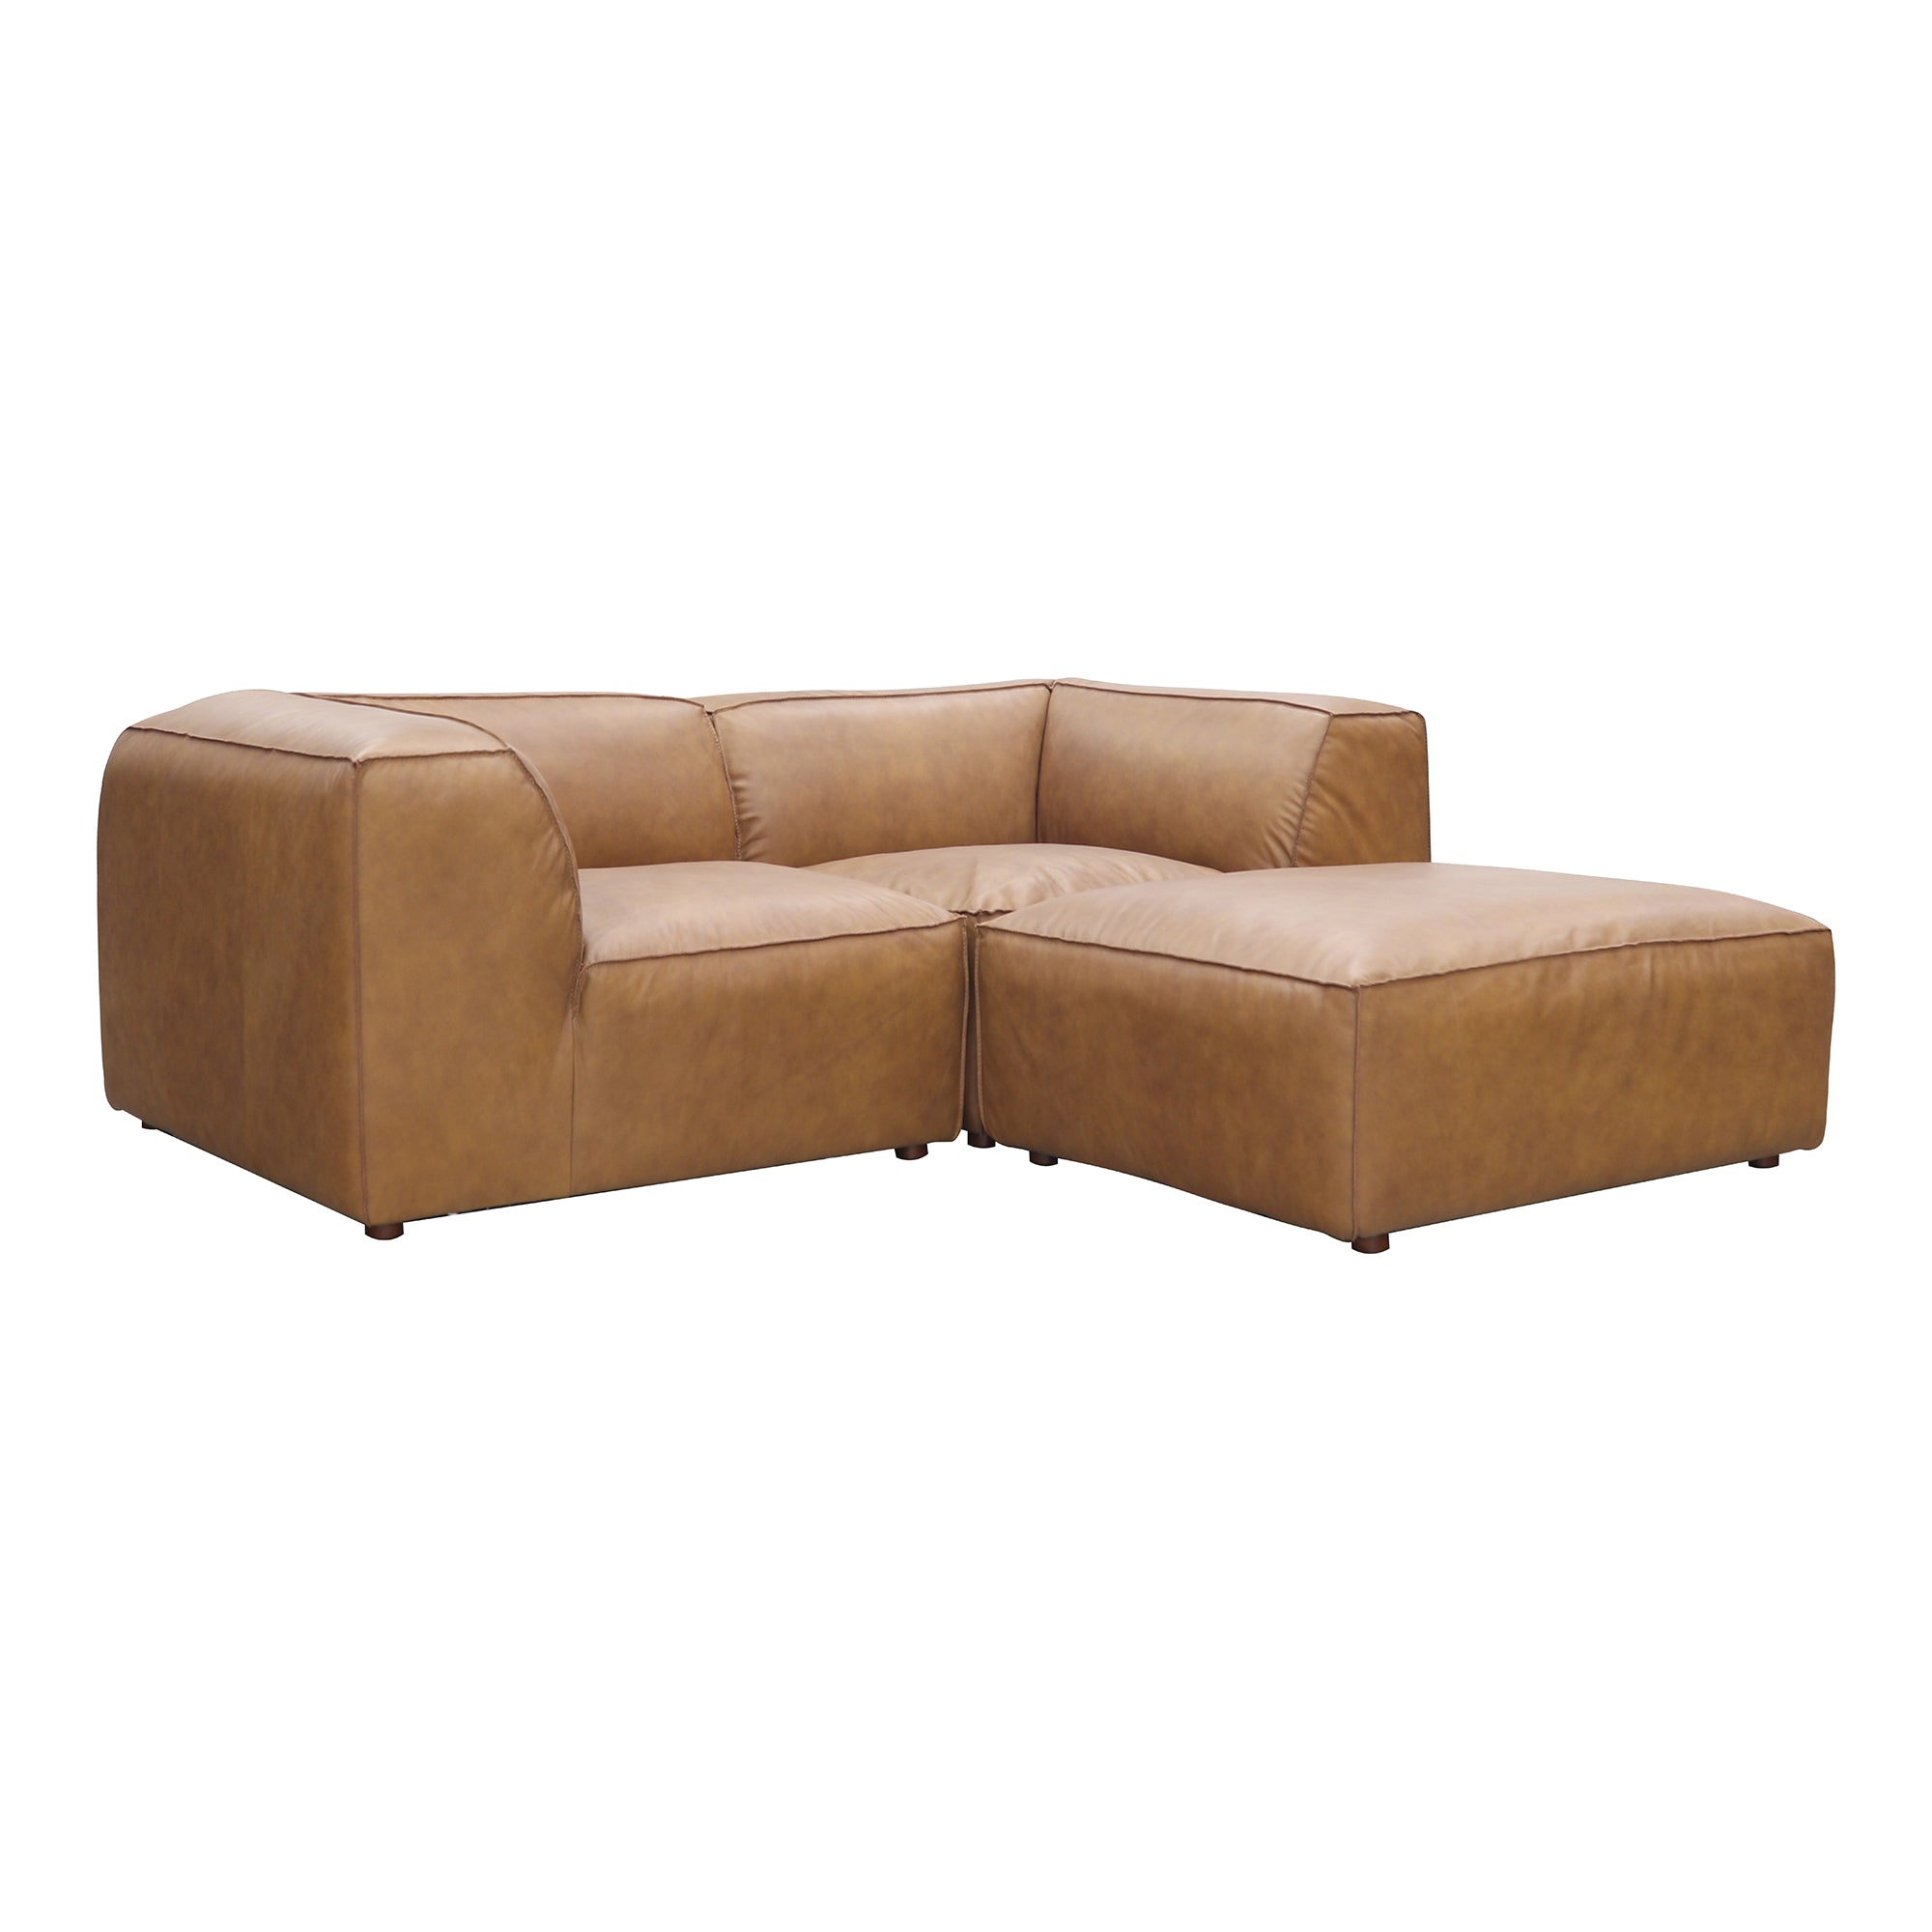 Form Nook Modular Sectional Sonoran Tan Leather